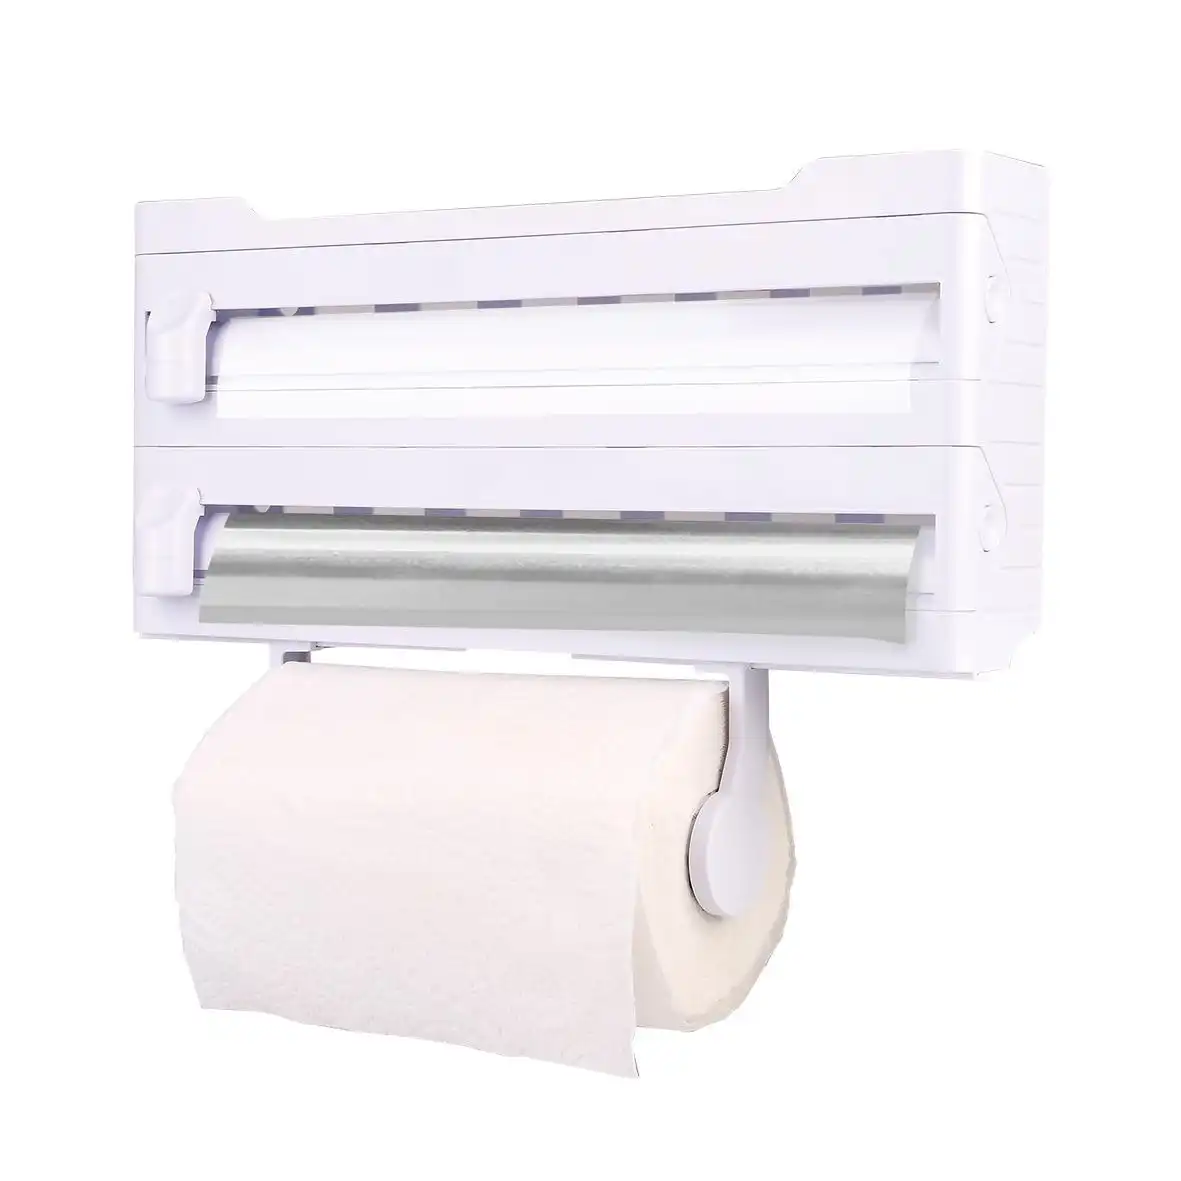 Leifheit Wall Mount Paper Towel Holder with Spice Rack - White